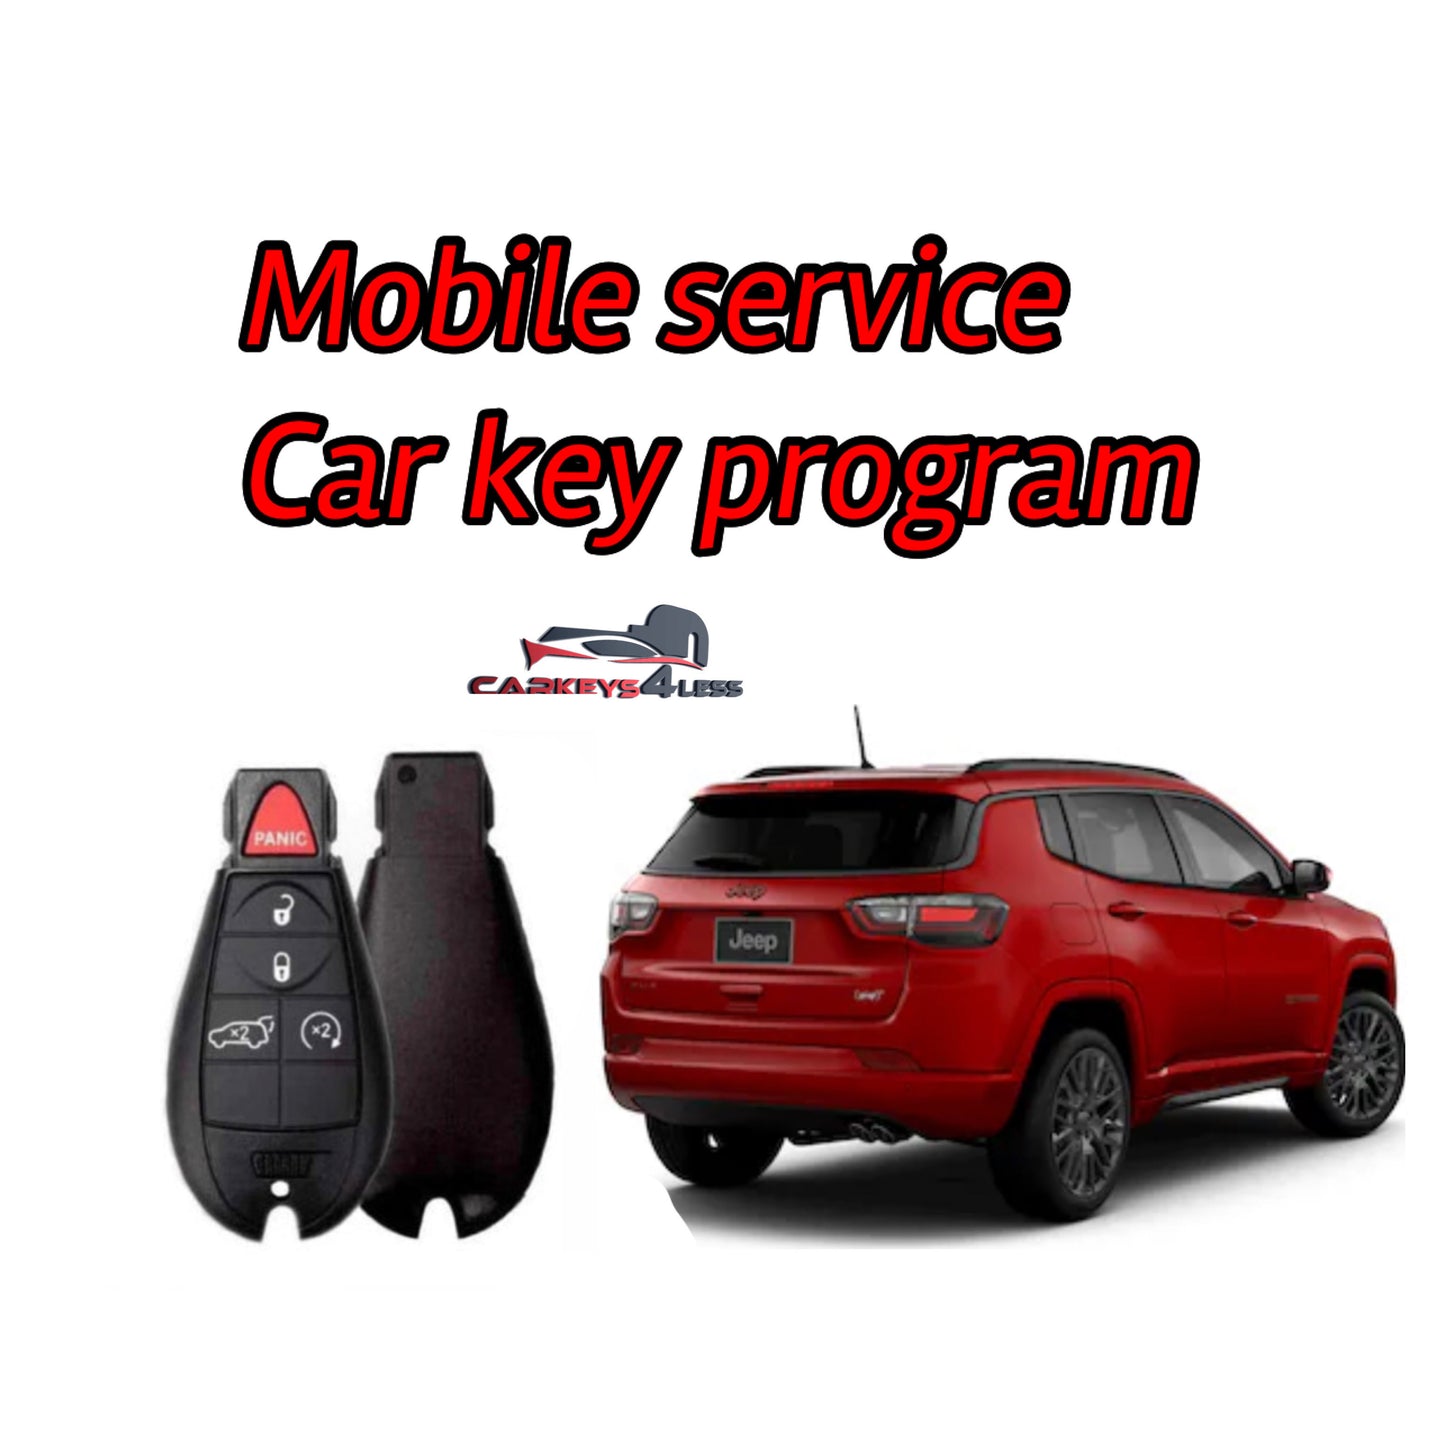 Mobile service for an aftermarket car key replacement